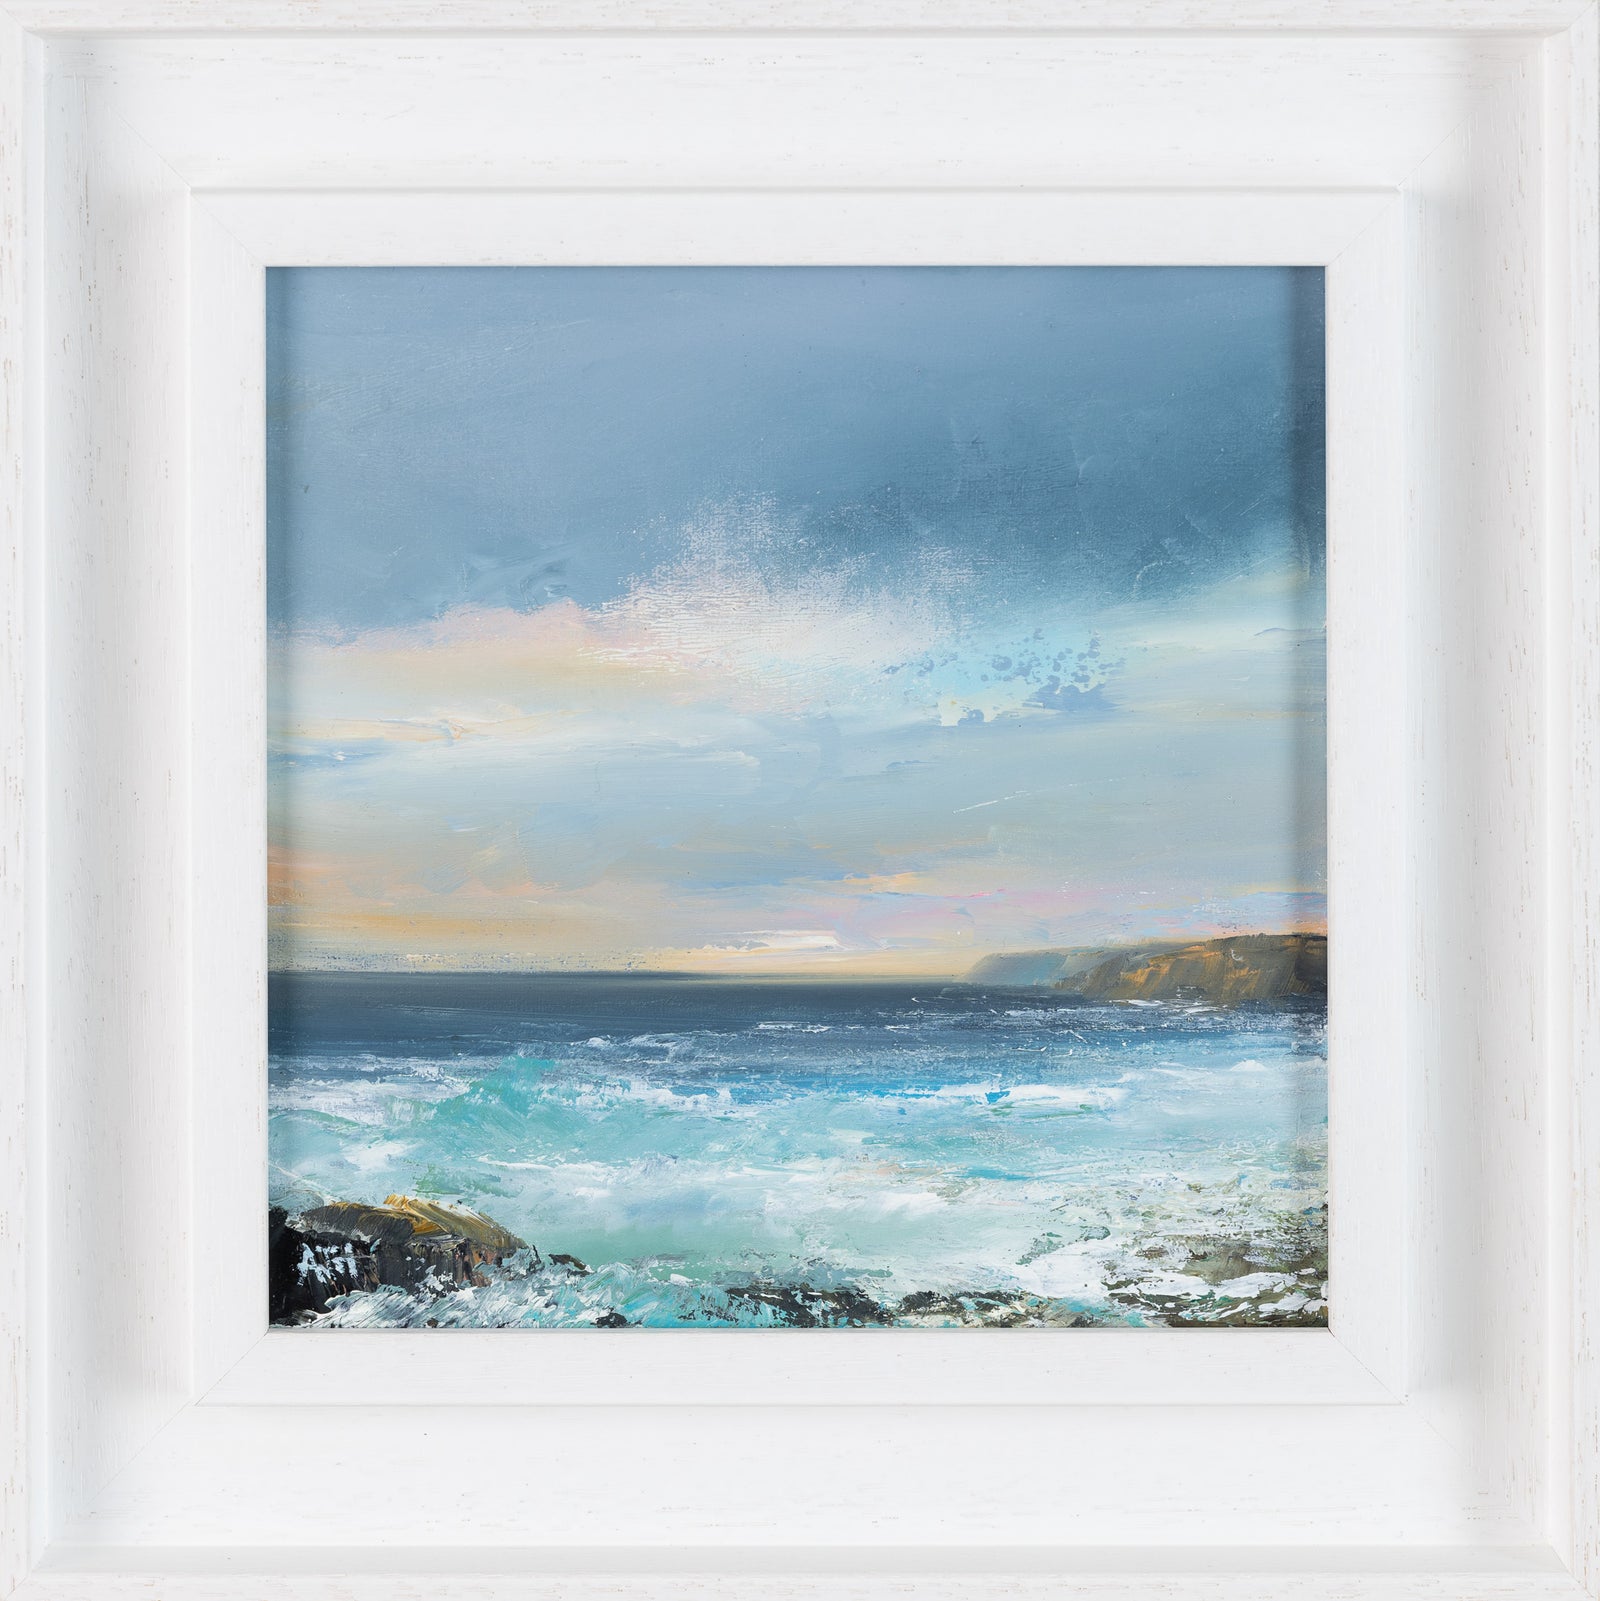 'Evening Sky over Daymer Bay' oil on board original by Amanda Hoskin, available at Padstow Gallery, Cornwall